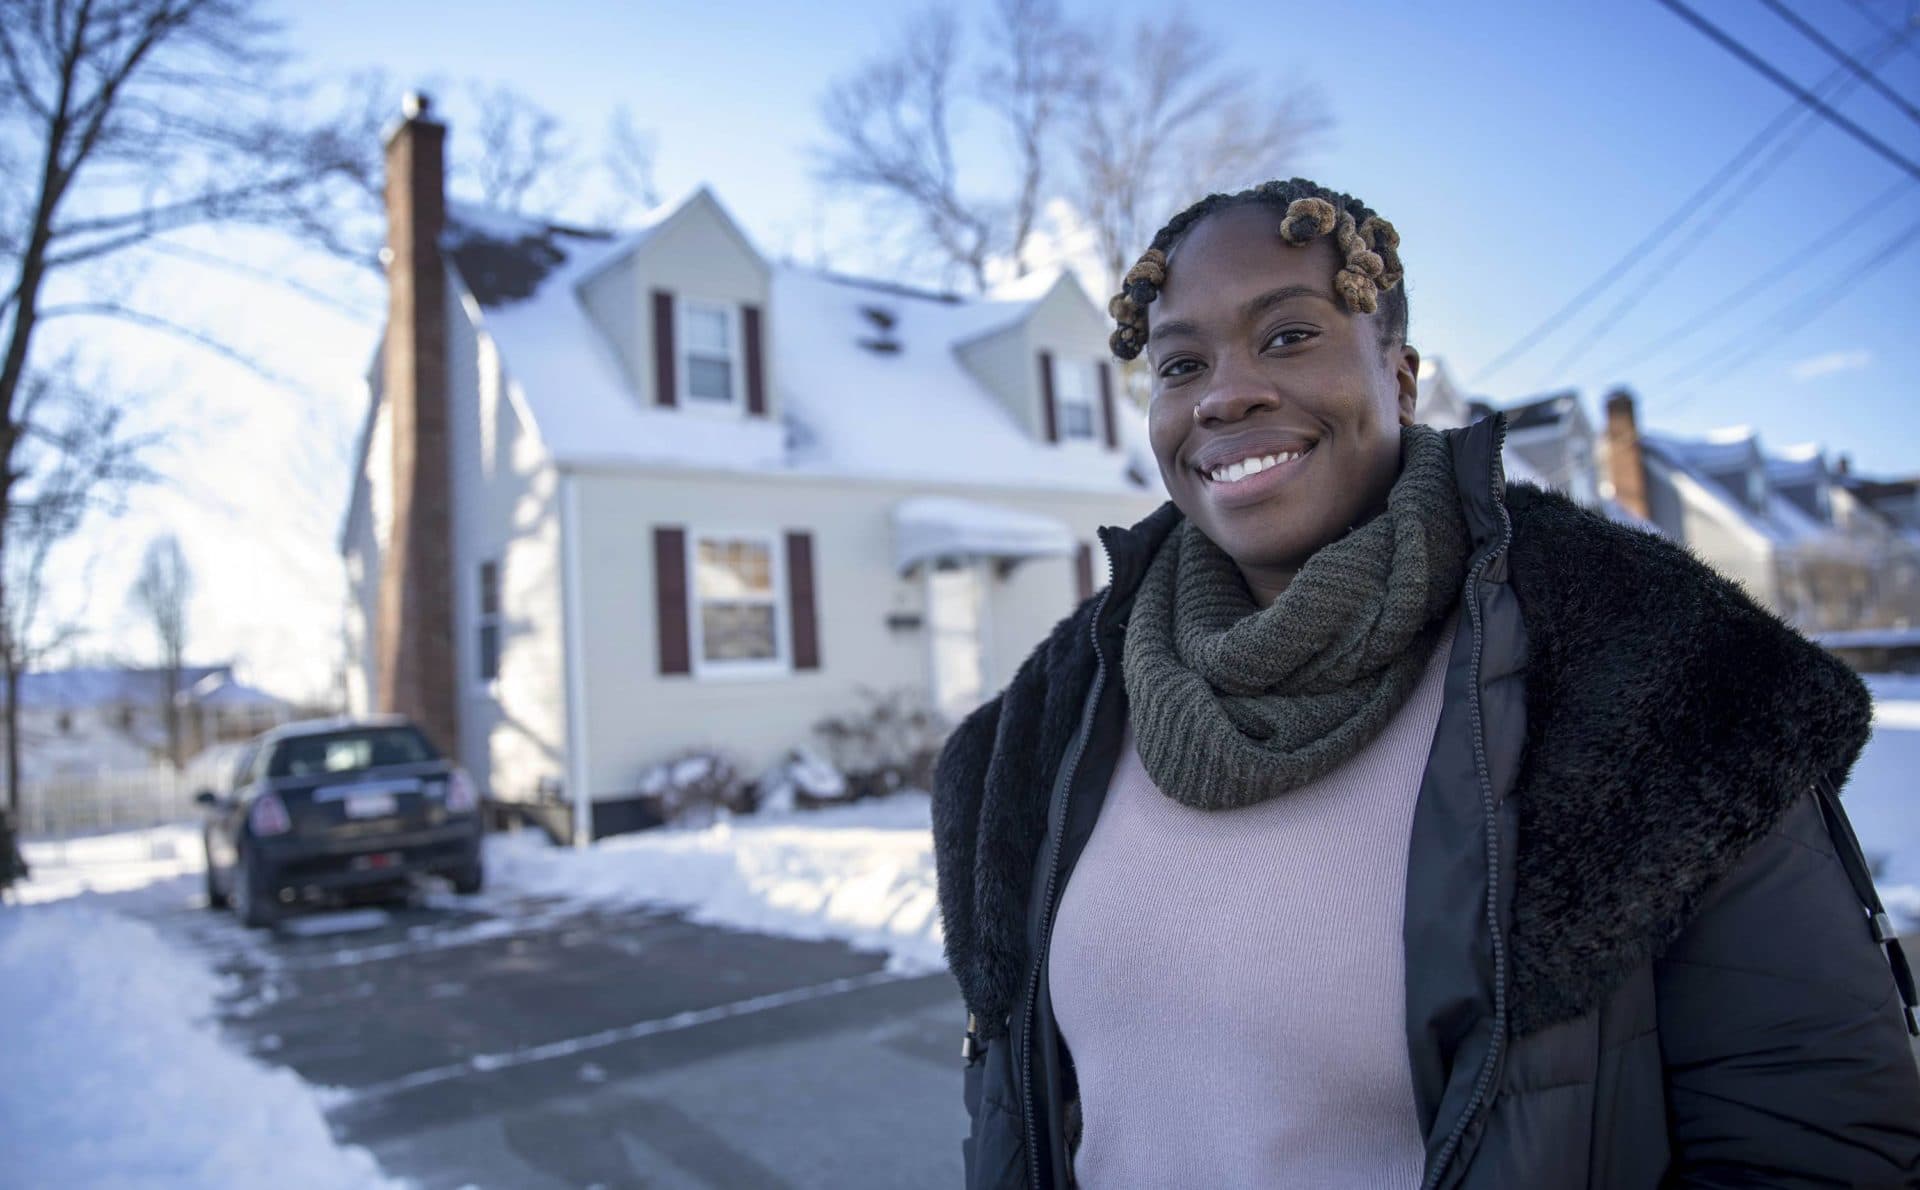 Sabrina Xavier wanted to purchase a home in Boston, but she ended up buying this house in Brockton. (Robin Lubbock/WBUR)